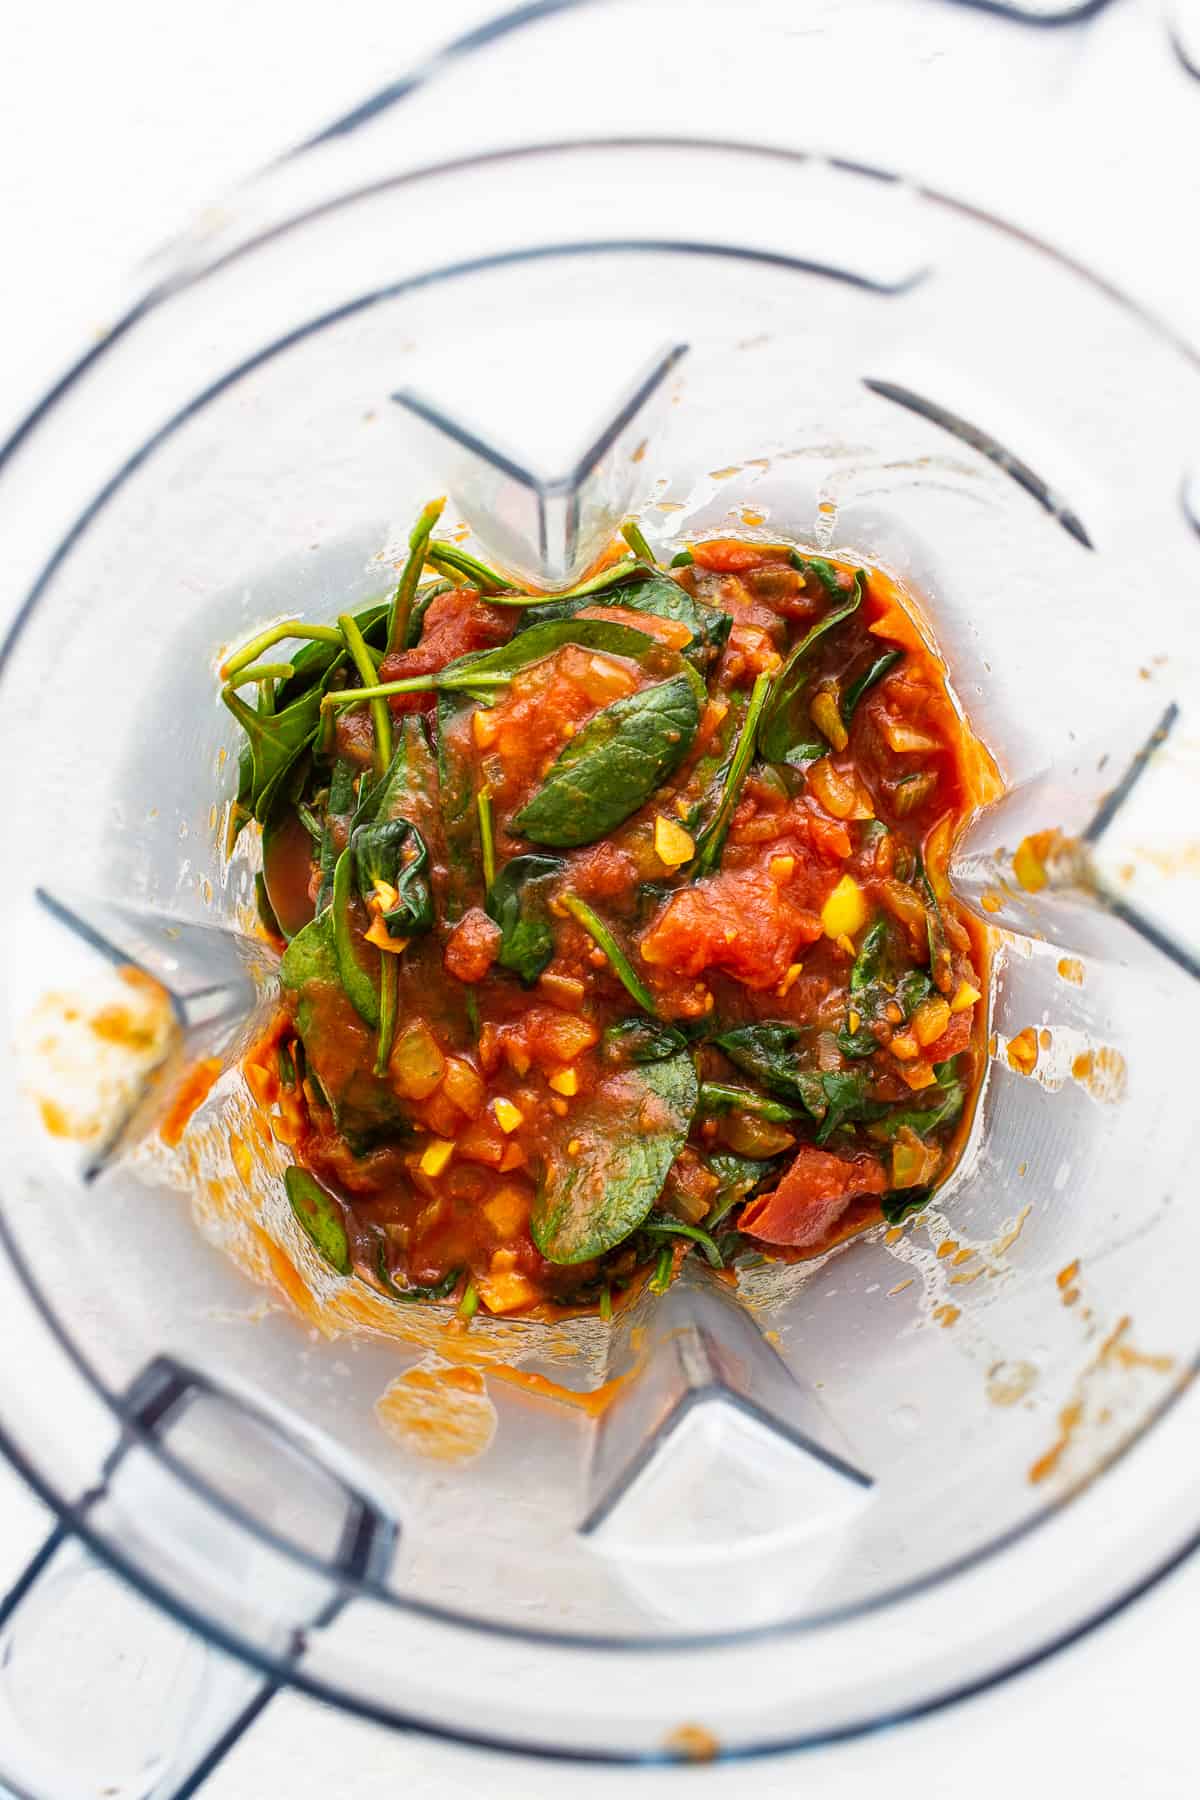 Spinach and tomato sauce in a blender.